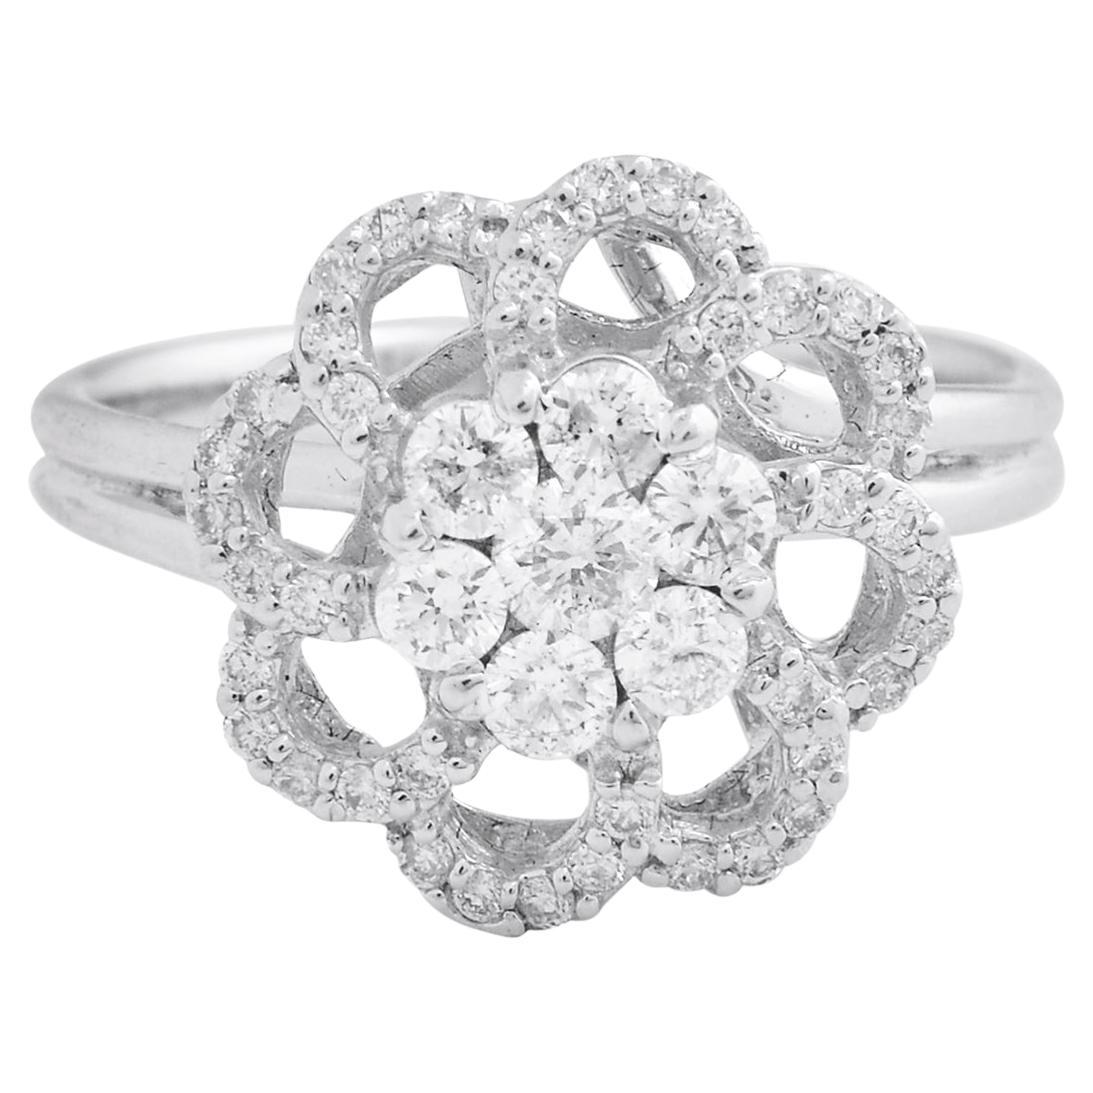 For Sale:  0.70 Carat SI Clarity HI Color Diamond Flower Ring 18 Karat White Gold Jewelry